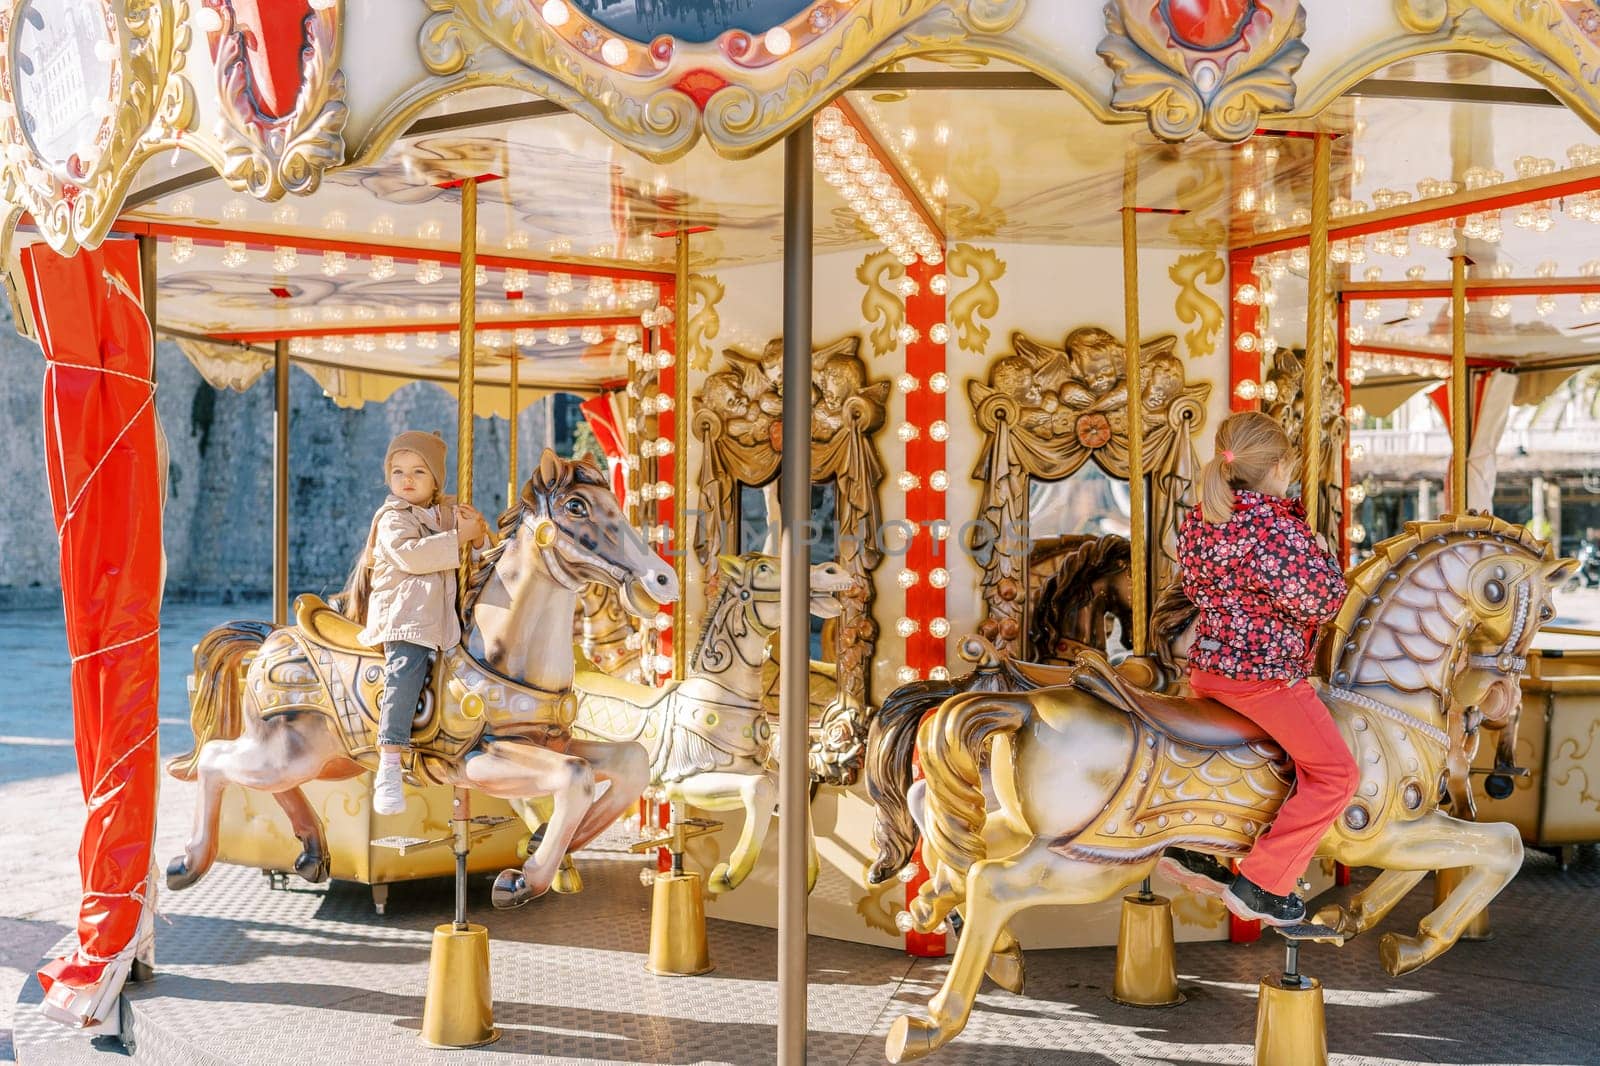 Little children ride colorful toy horses on a carousel while holding onto a pole by Nadtochiy